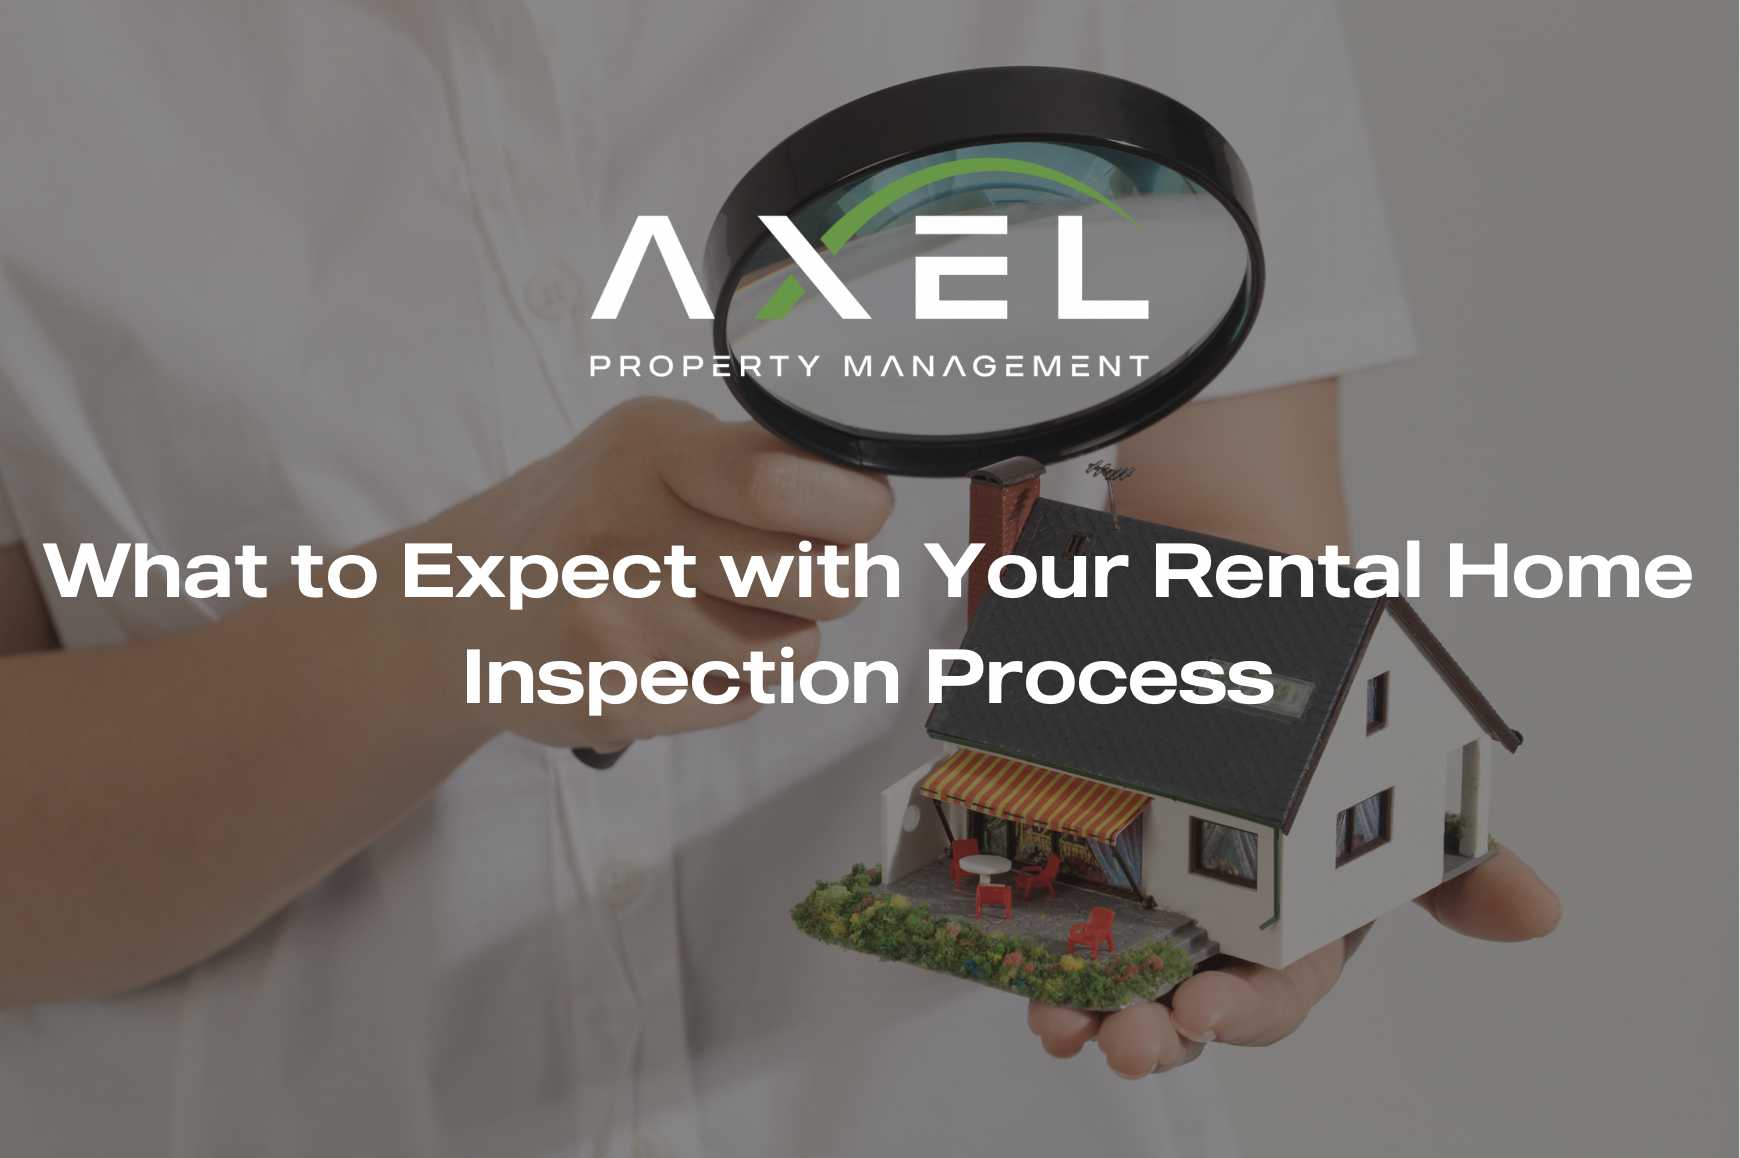 What to Expect with Your Rental Home Inspection Process